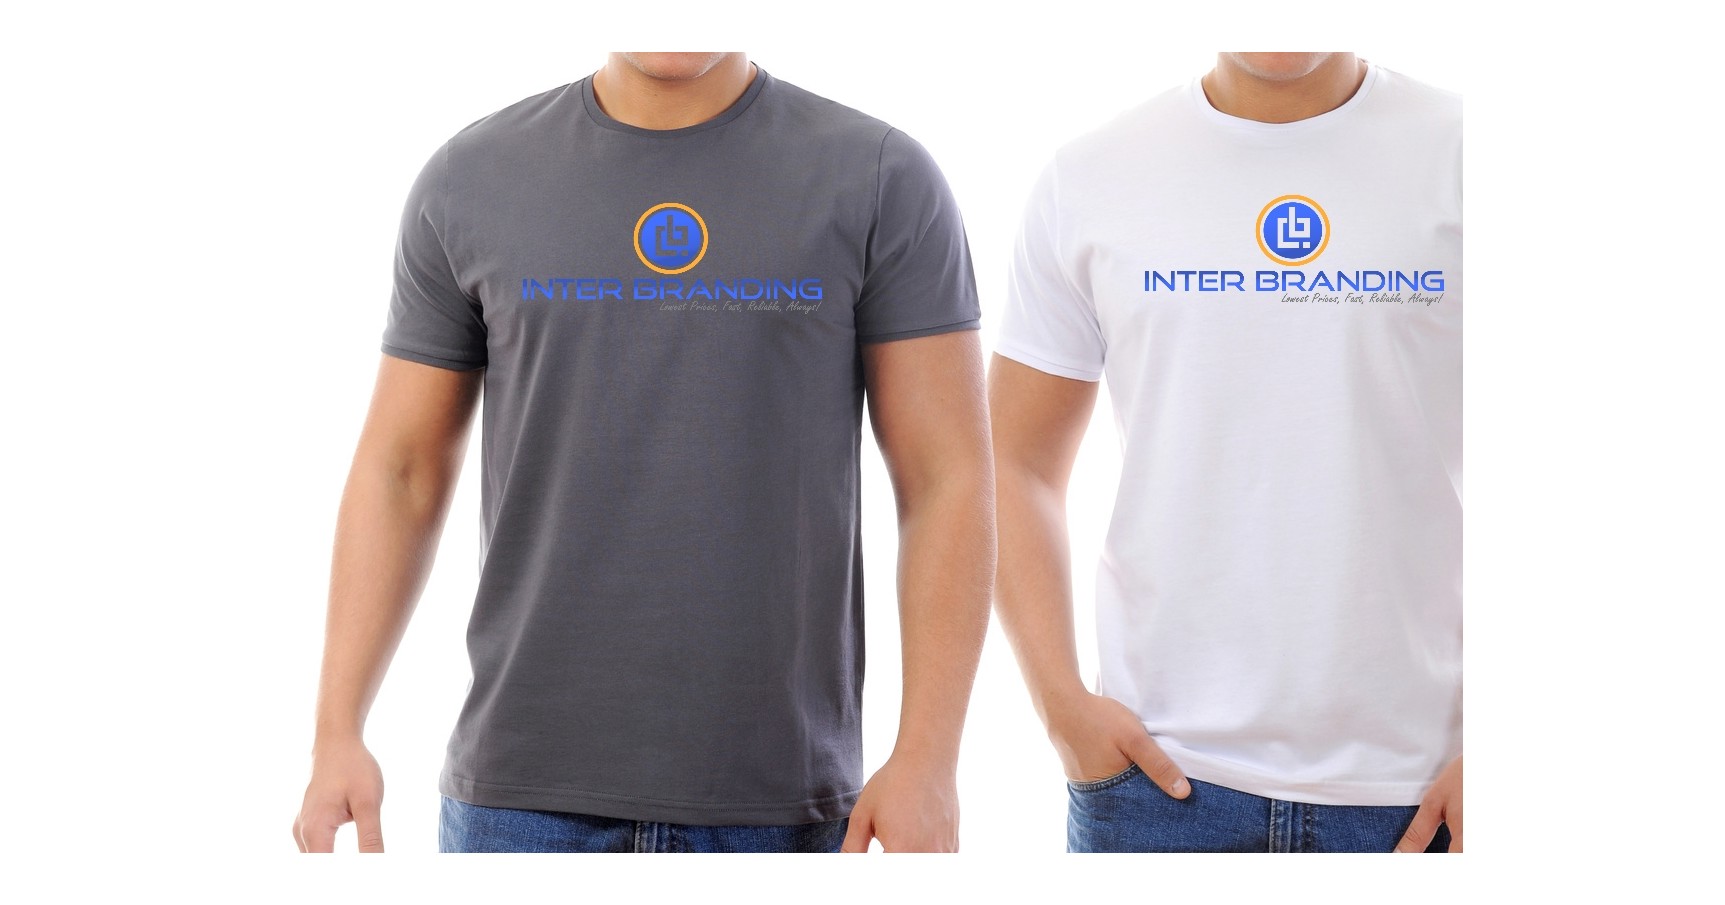 T-Shirt Marketing: How a Branded Shirt Can Change Your Business